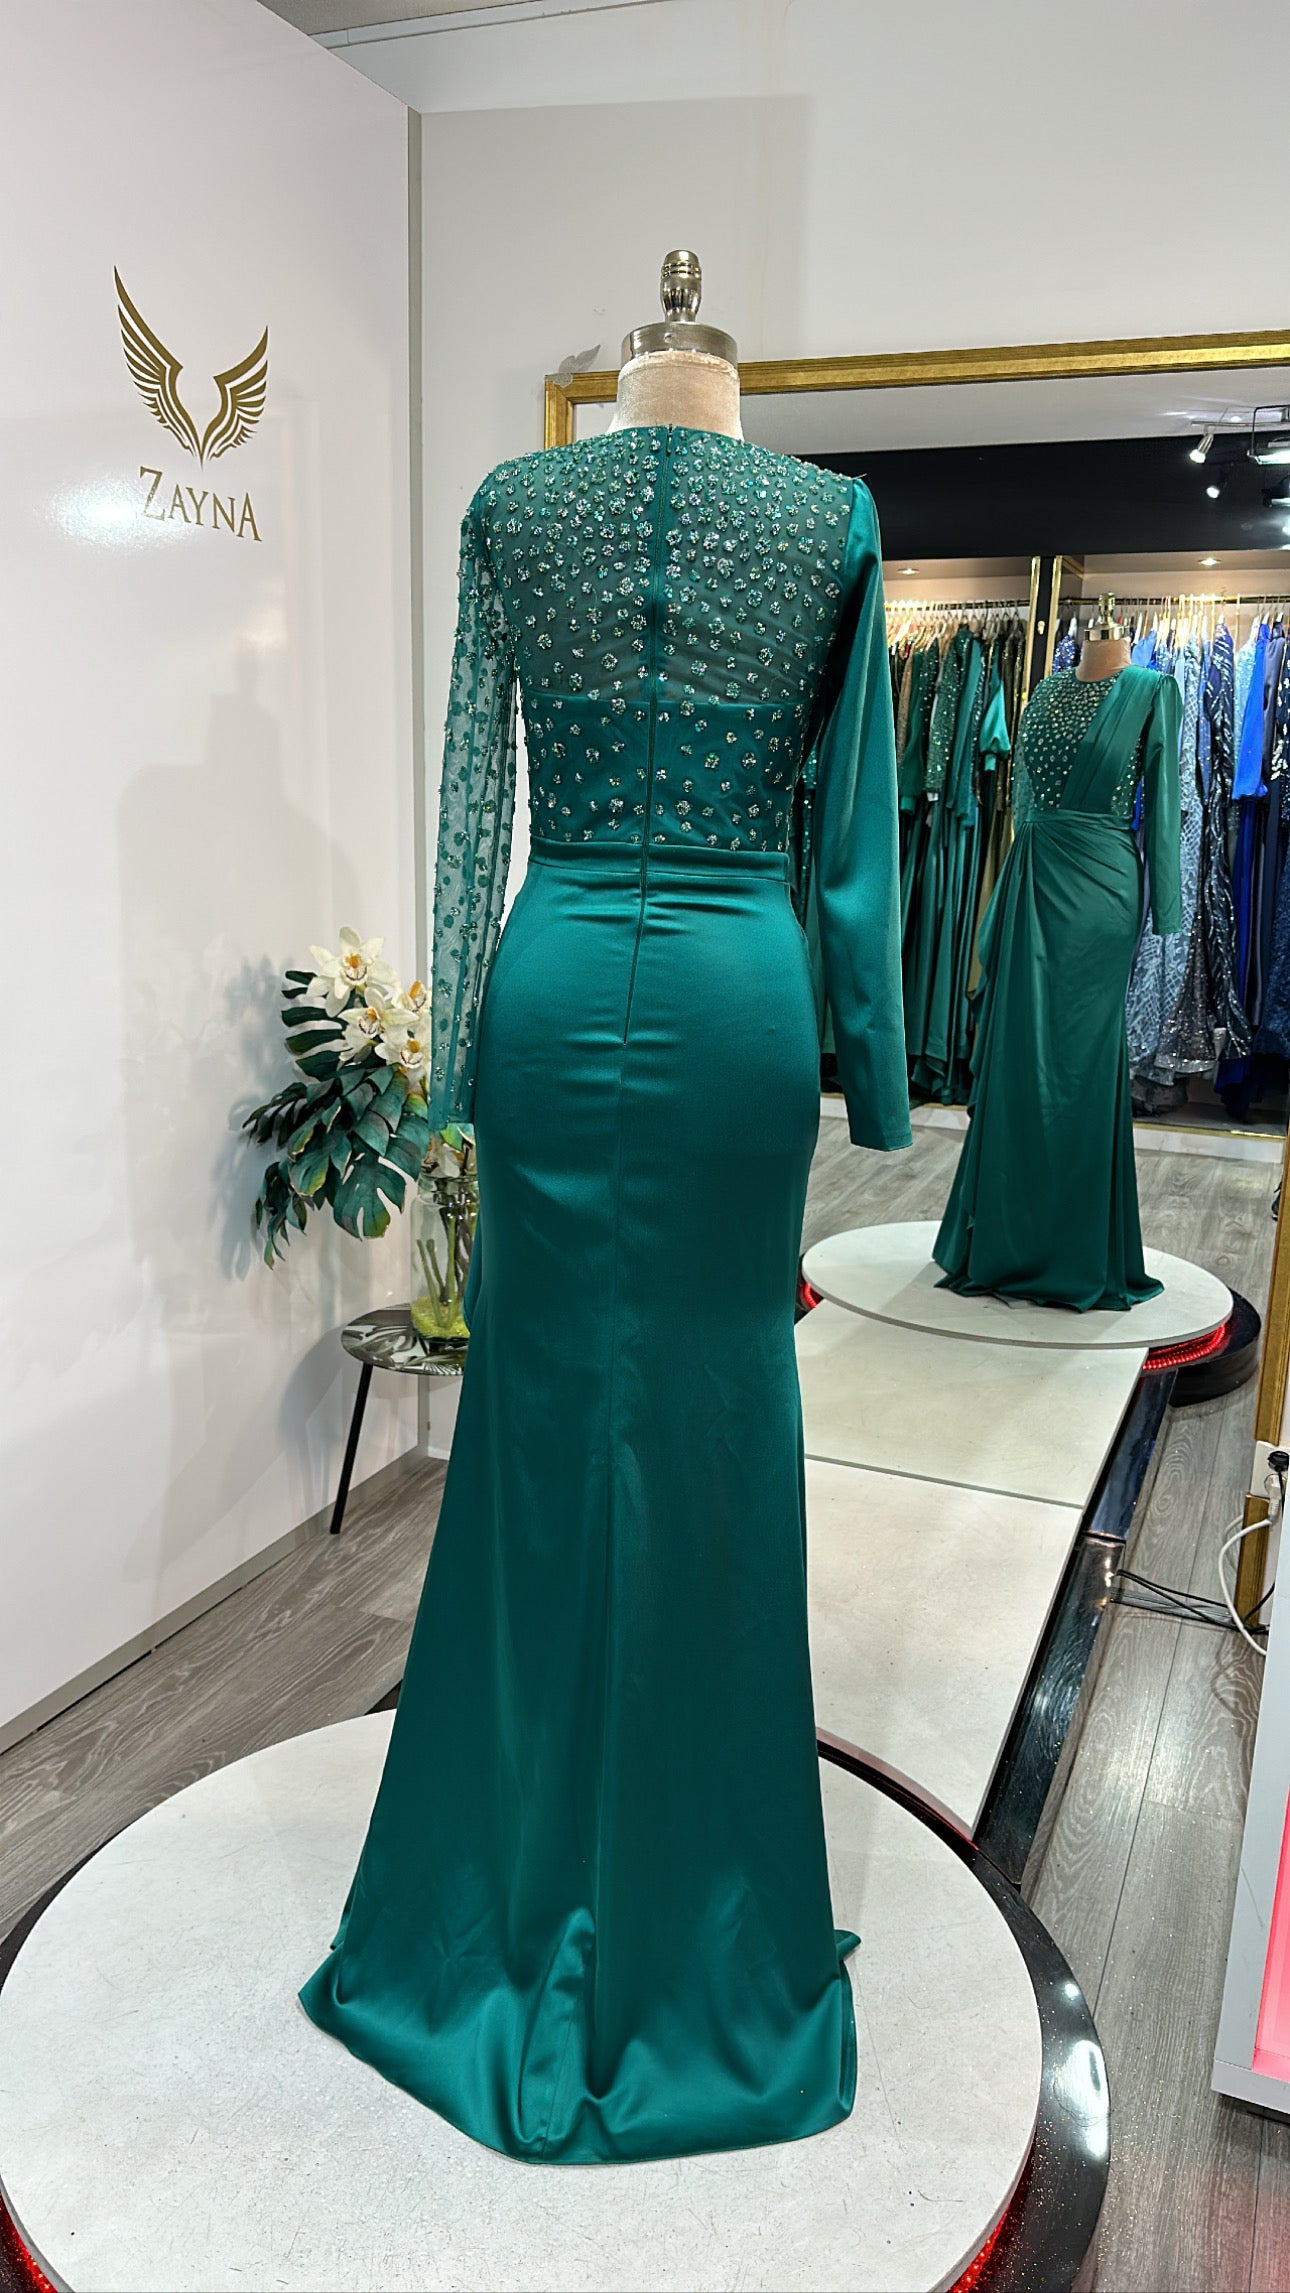 Vintage Emerald Green Ball Gown With Shiny Accents, Lace Up Back, And  Appliques For Girls Quinceanera Marriage Party Dress 15 Years Old From  Zaomeng321, $215.44 | DHgate.Com